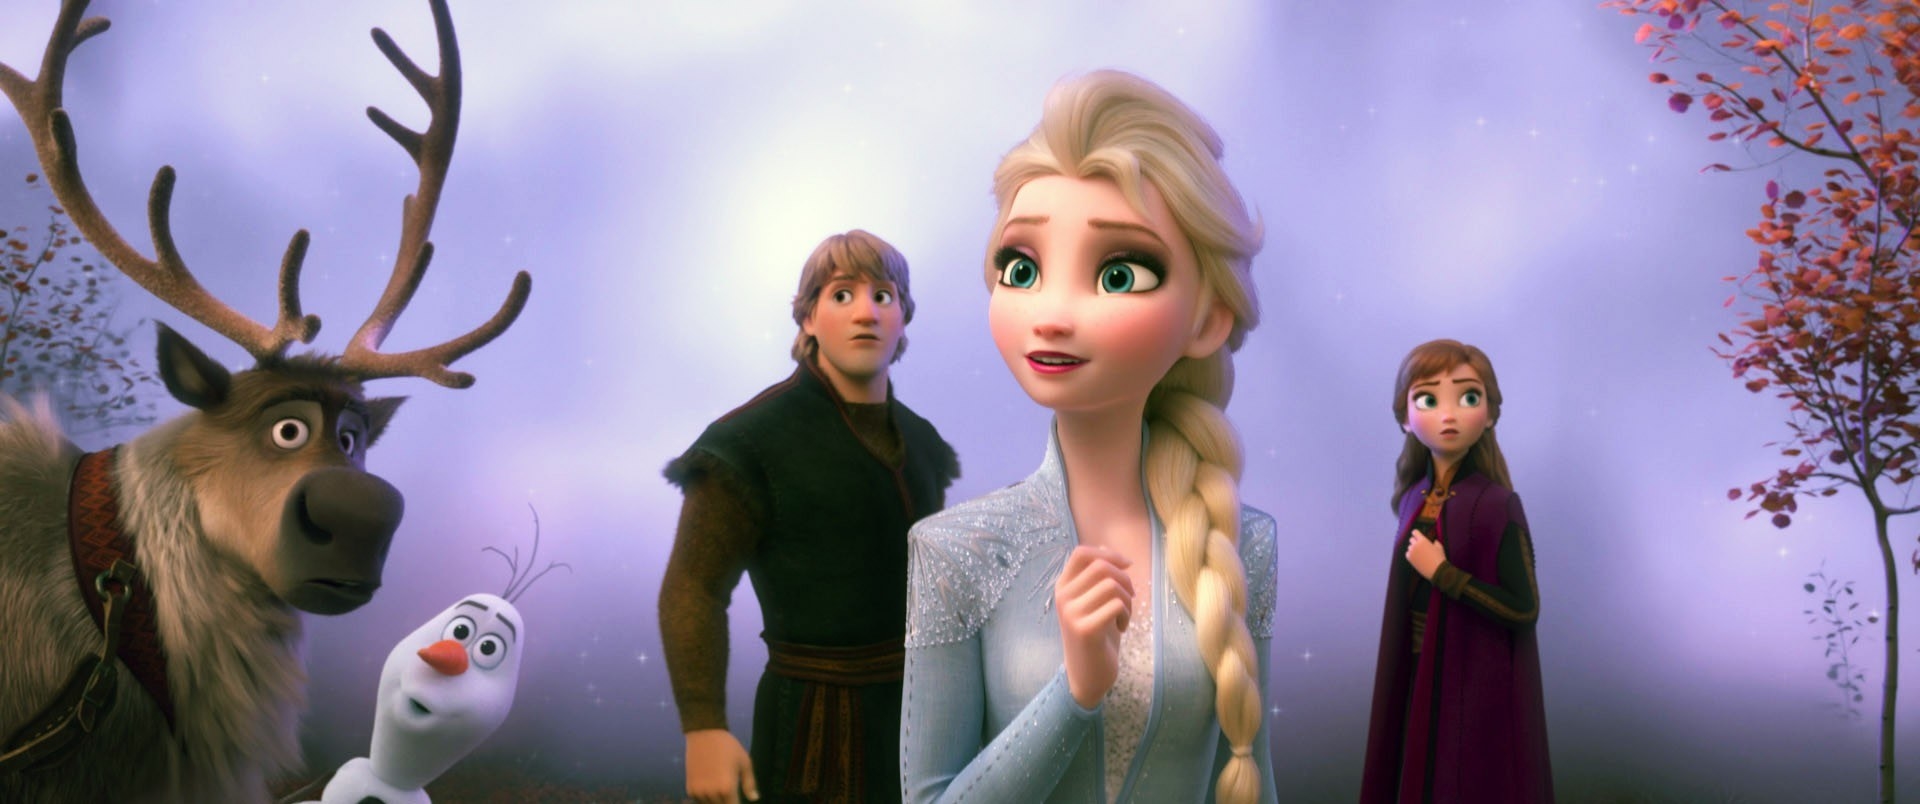 Elsa and the other character looking forward